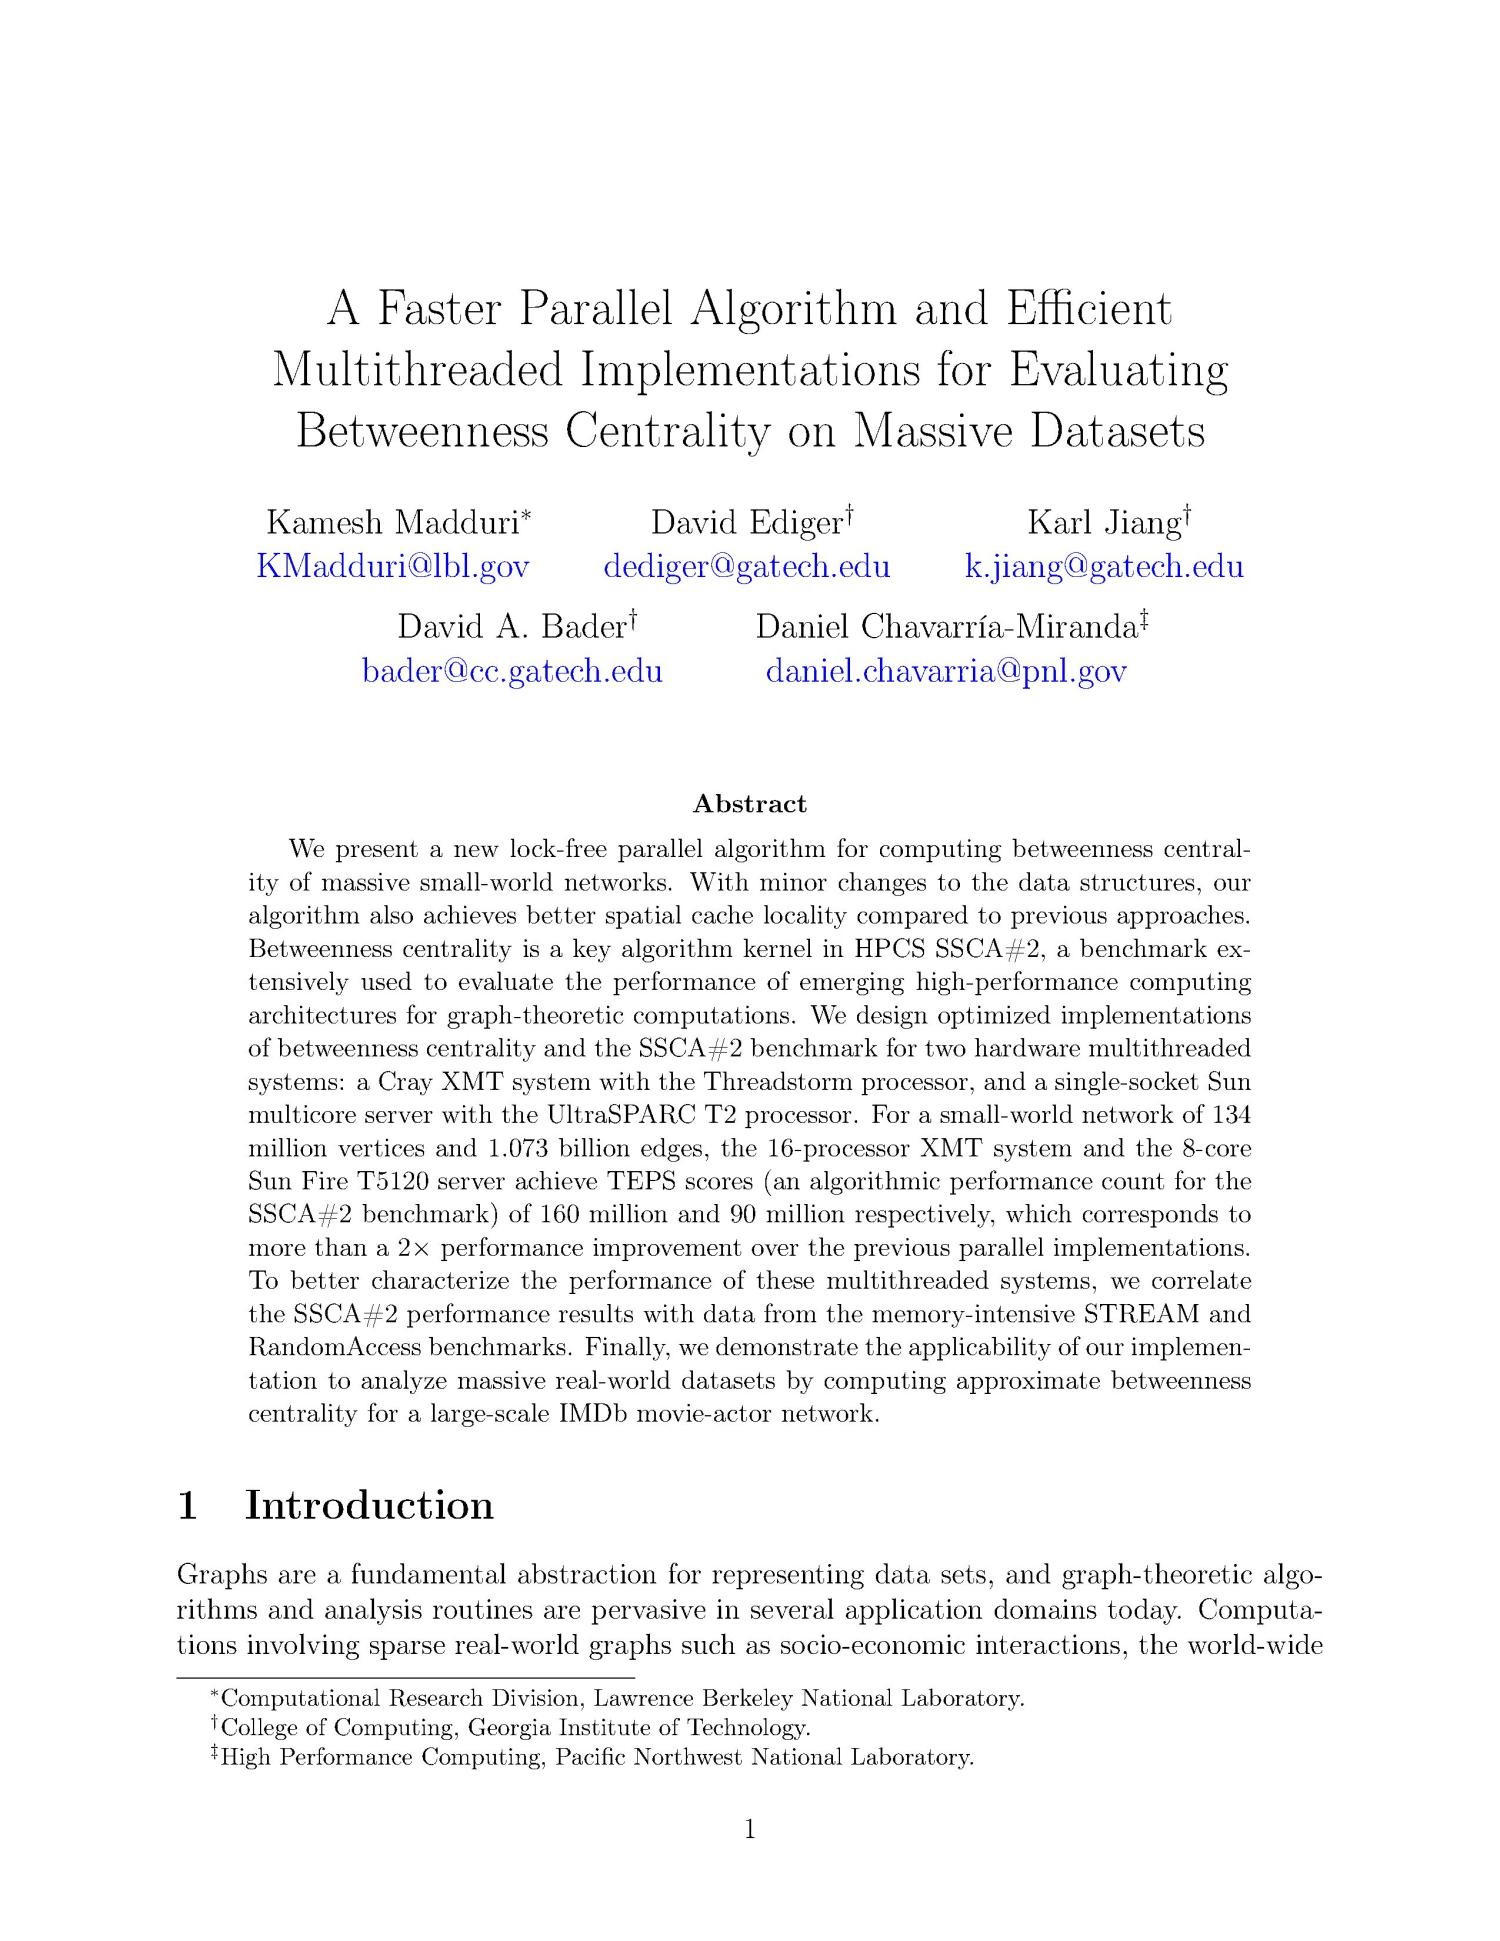 A Faster Parallel Algorithm and Efficient Multithreaded Implementations for Evaluating Betweenness Centrality on Massive Datasets
                                                
                                                    [Sequence #]: 1 of 21
                                                